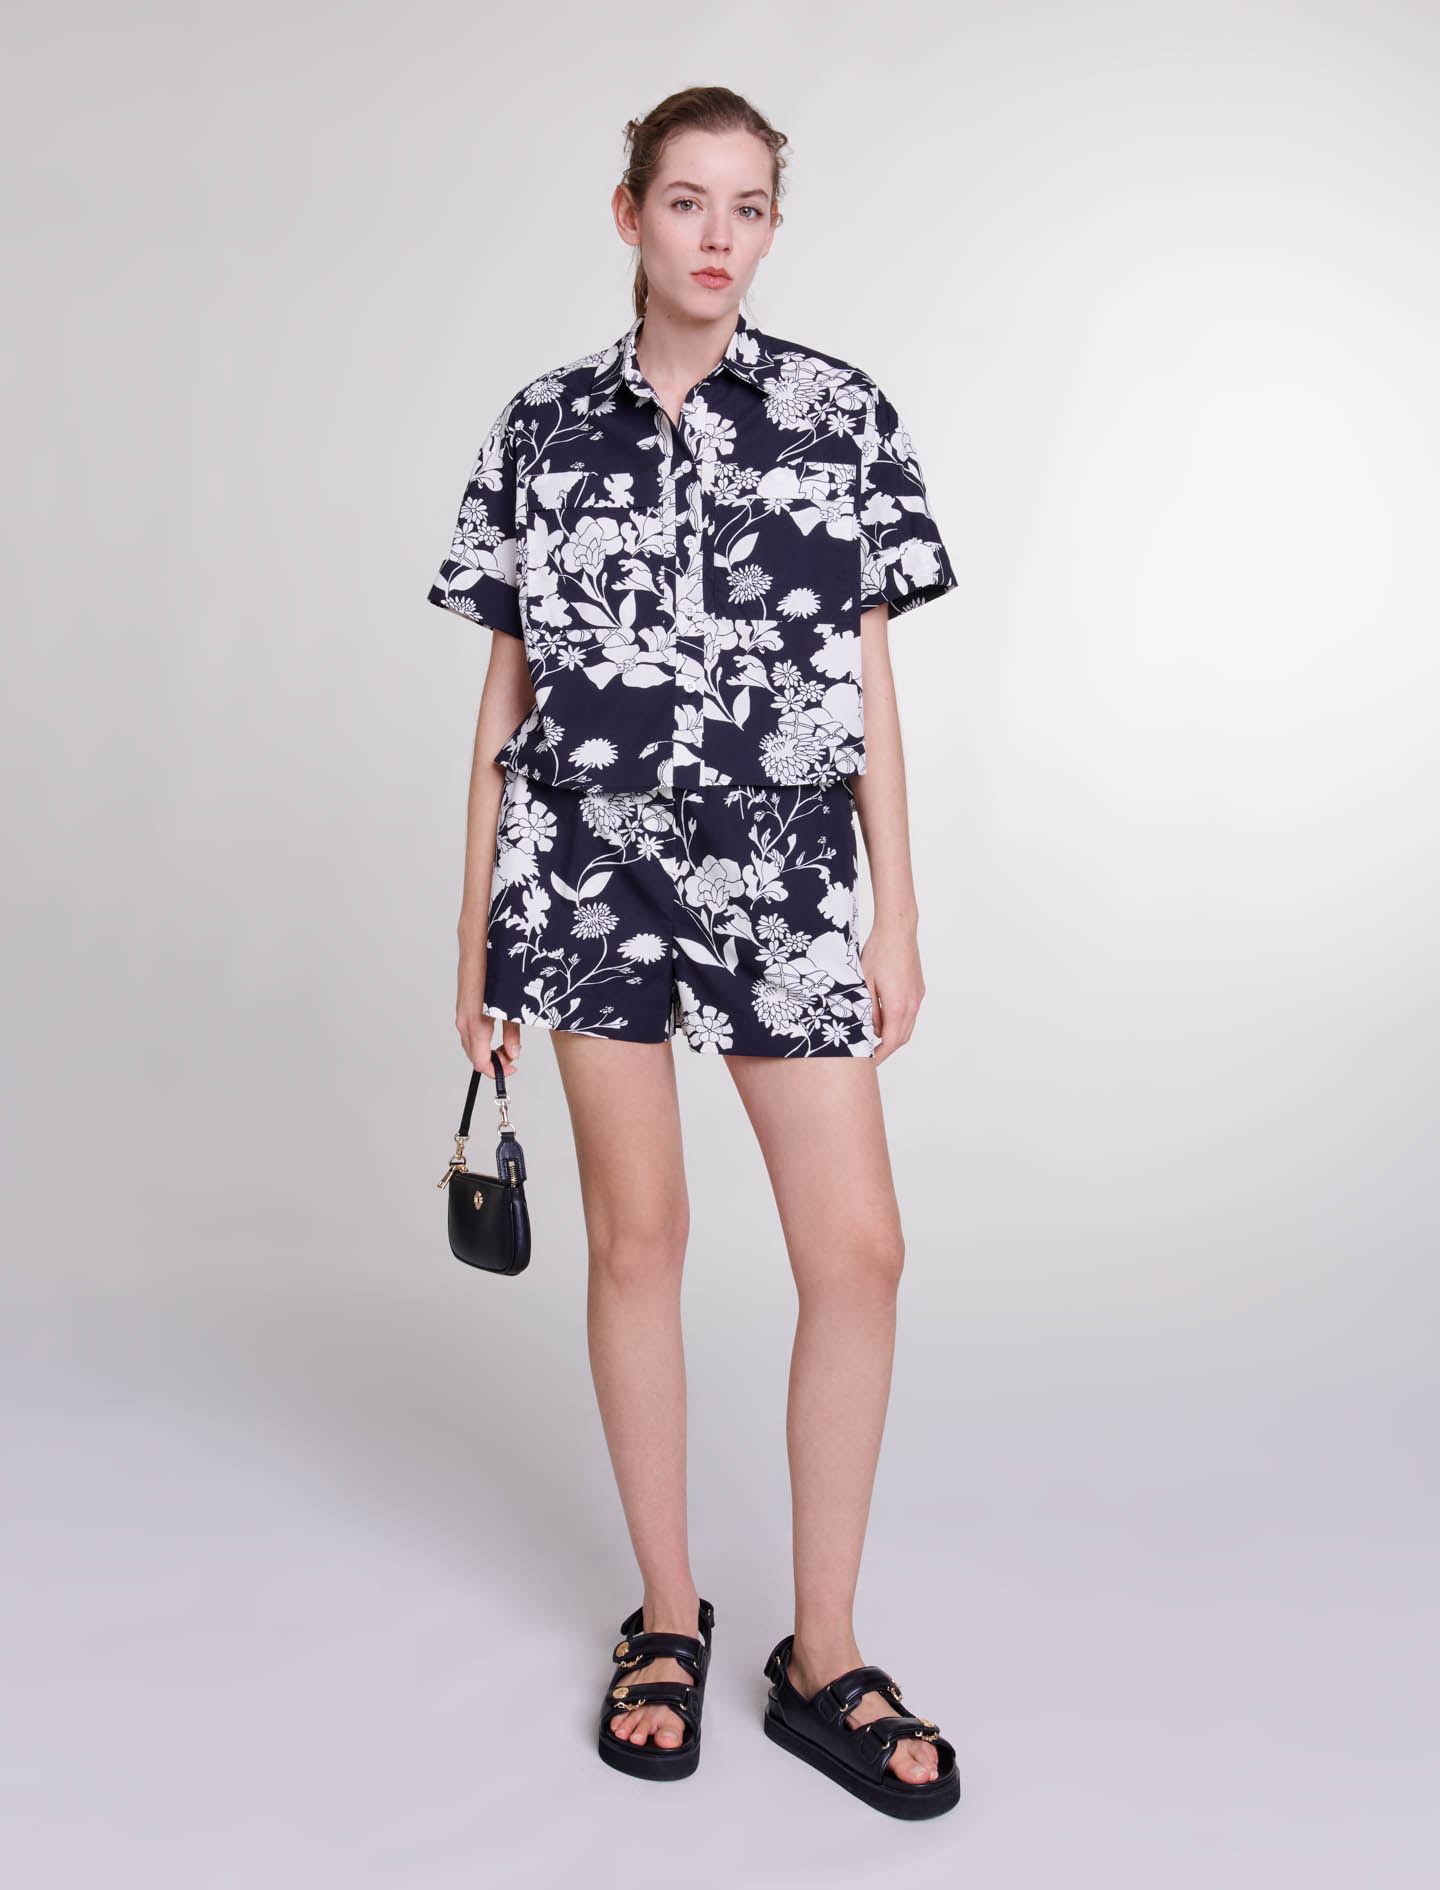 Mixte's cotton Patterned cropped shirt for Spring/Summer, size Mixte-Tops & Shirts-US L / FR 3, in color Floral ecru black print /